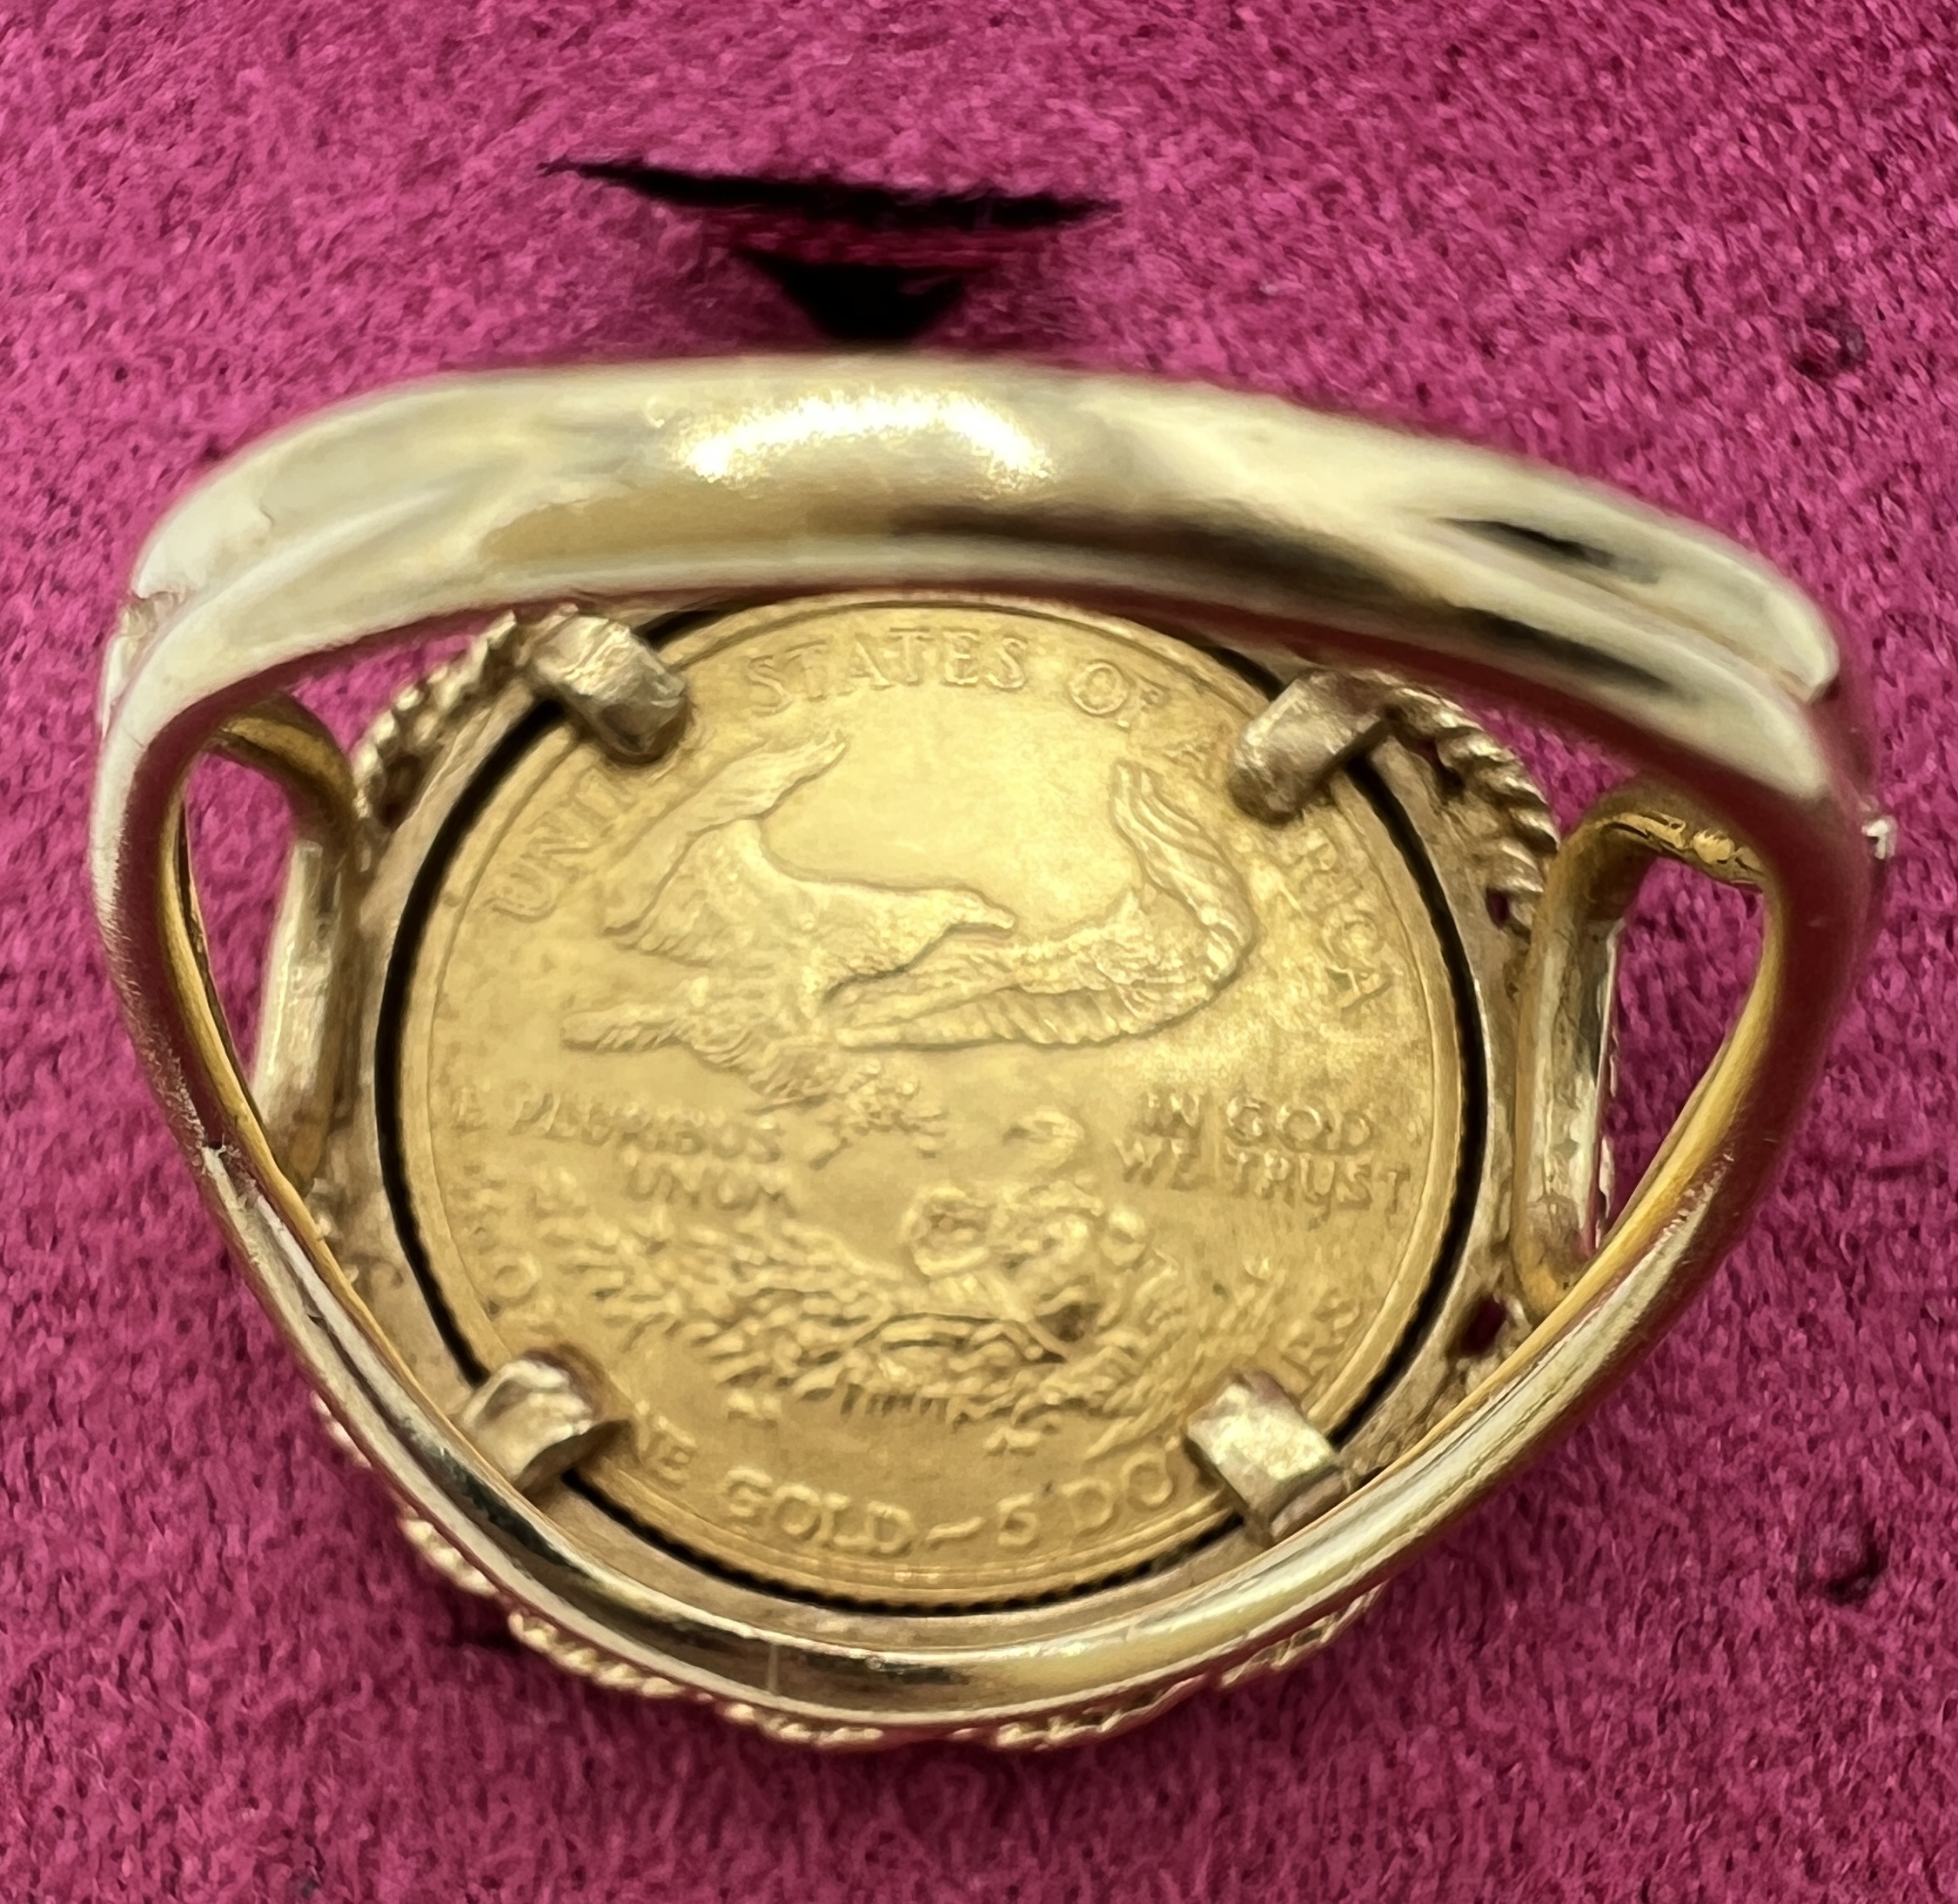 A 1986 Liberty Gold 5 Dollar coin ring set in 14 carat gold. Size O. Weight 7.8gm. - Image 3 of 3